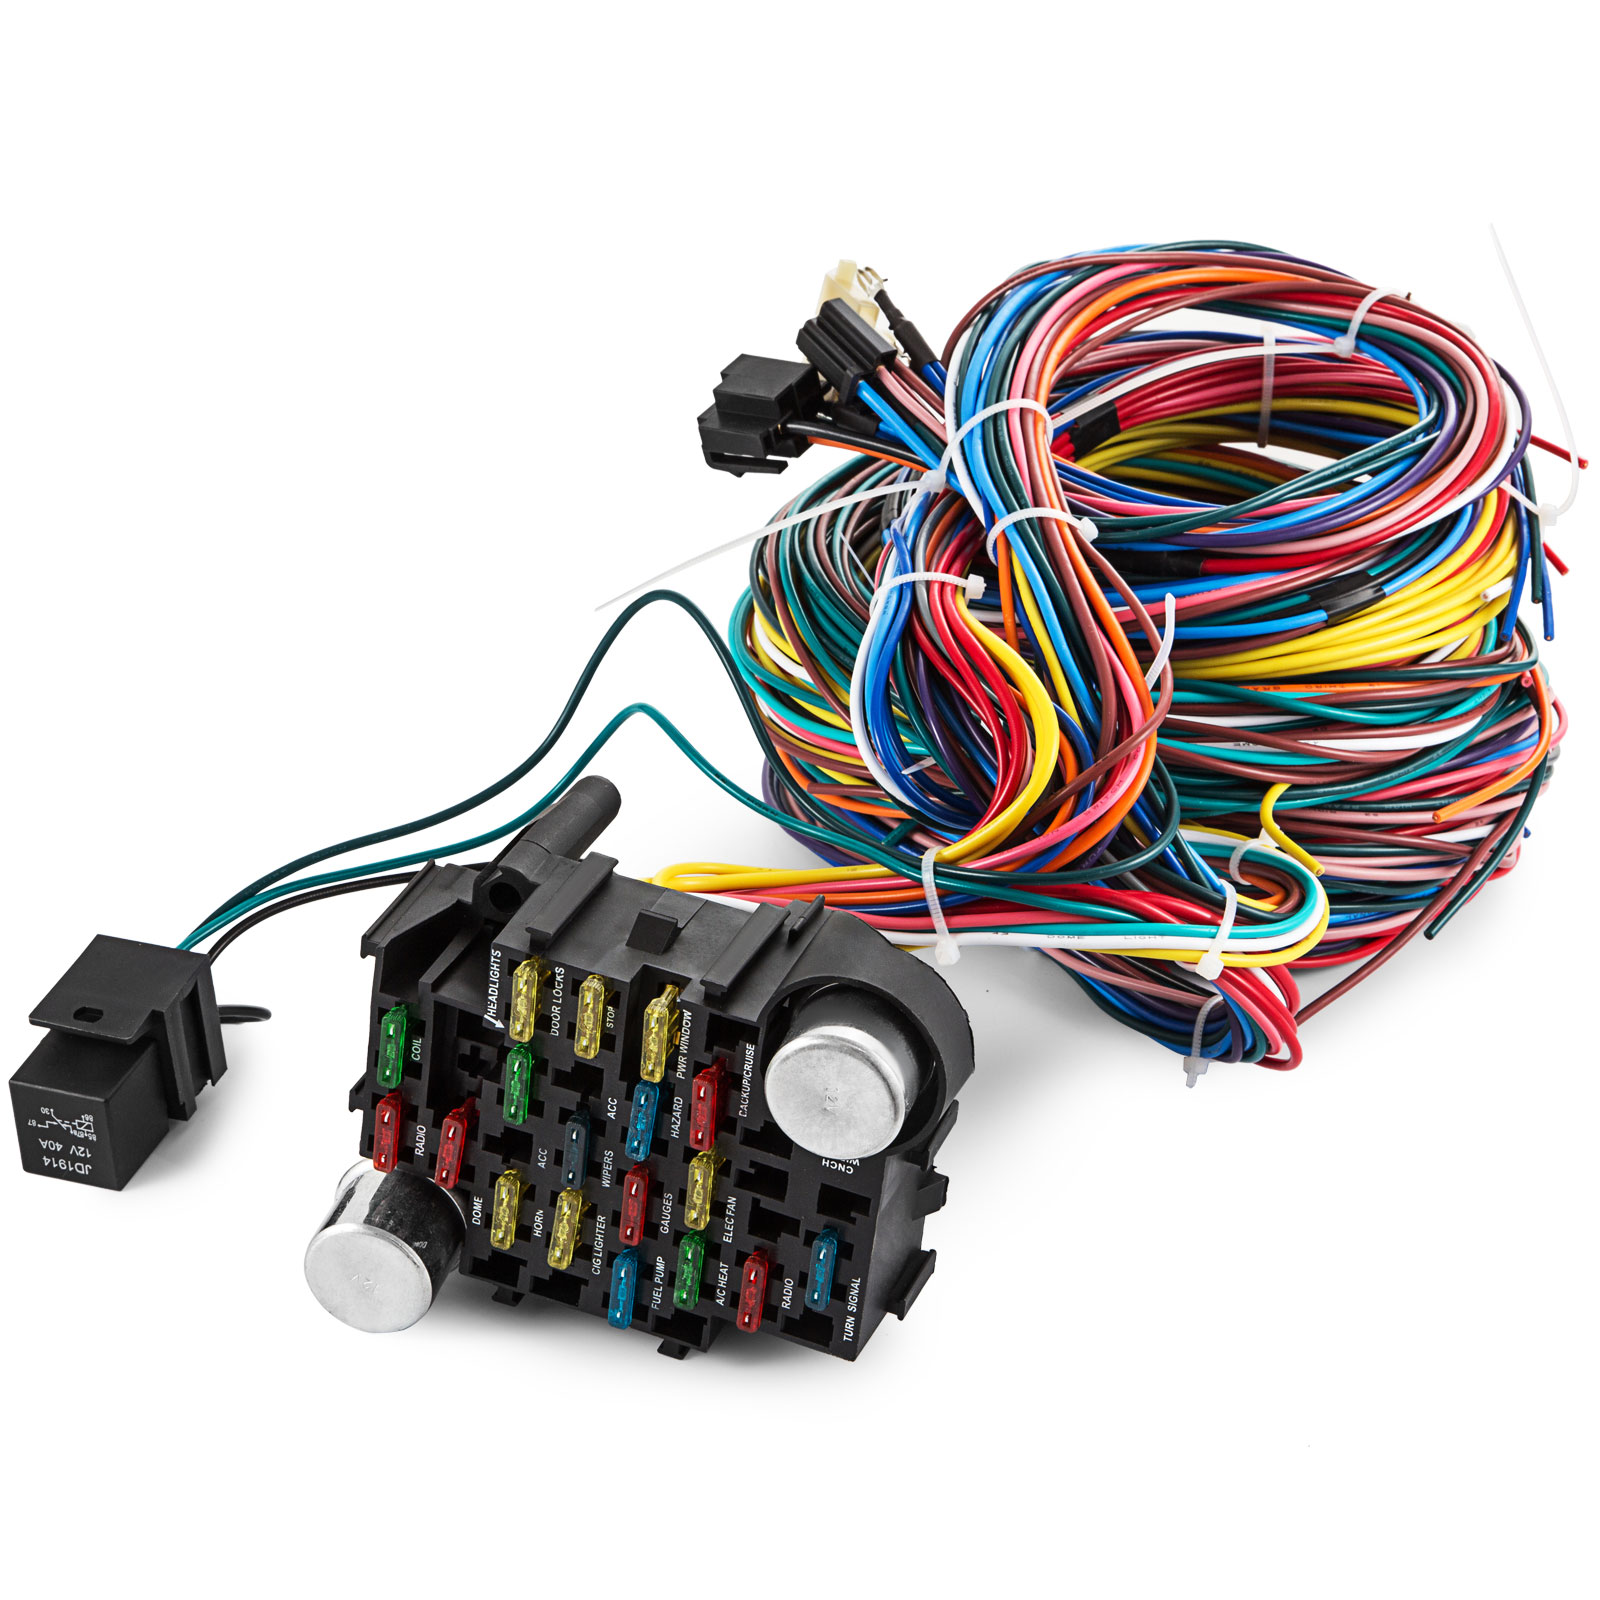 21 Circuit Wiring Harness For Chevy Universal Wires Fit X-long | eBay